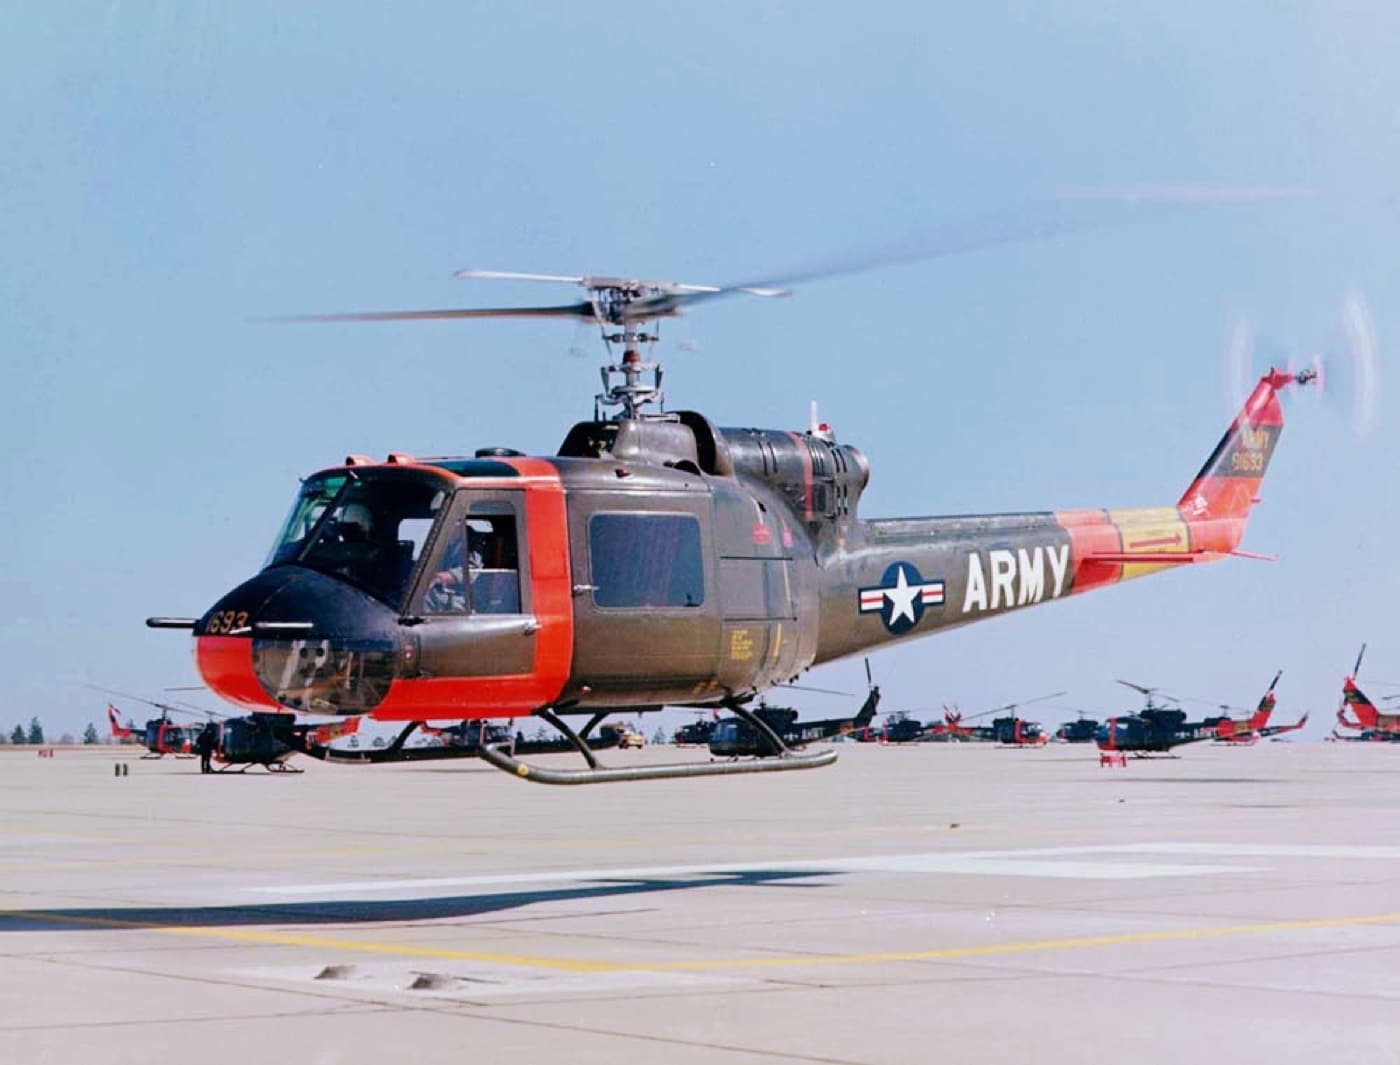 Shown here is one of the first production Bell Model 204 helicopters delivered to the United States military. The Army designated it as the HU-1, but redesignated it as the UH-1 in 1962. It deserves a central place in the Army Aviation Museum. 